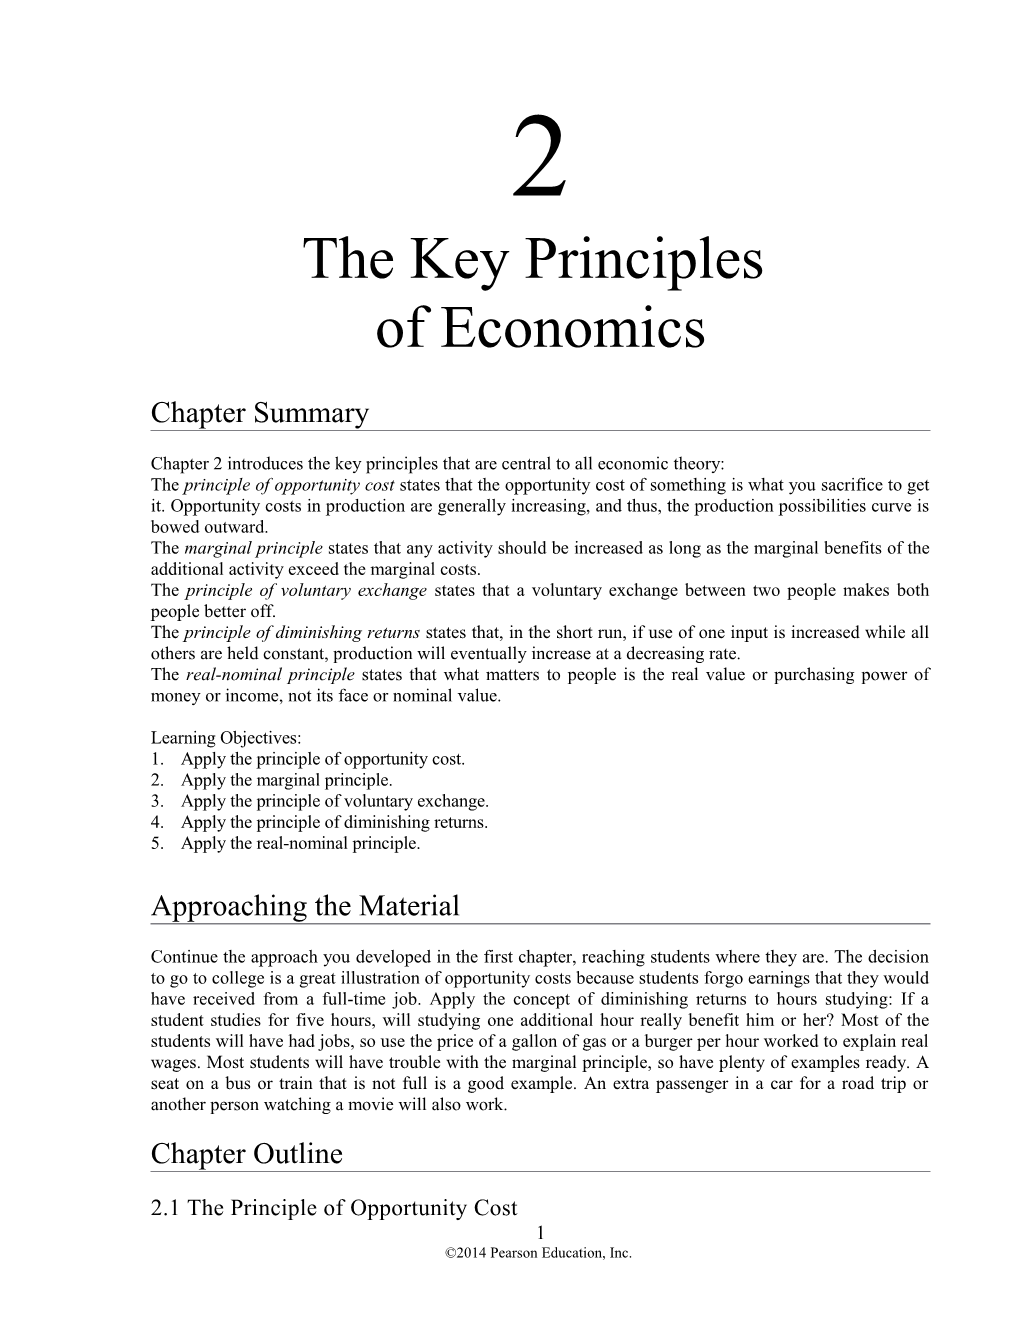 Chapter 2 Introduces the Key Principles That Are Central to All Economic Theory